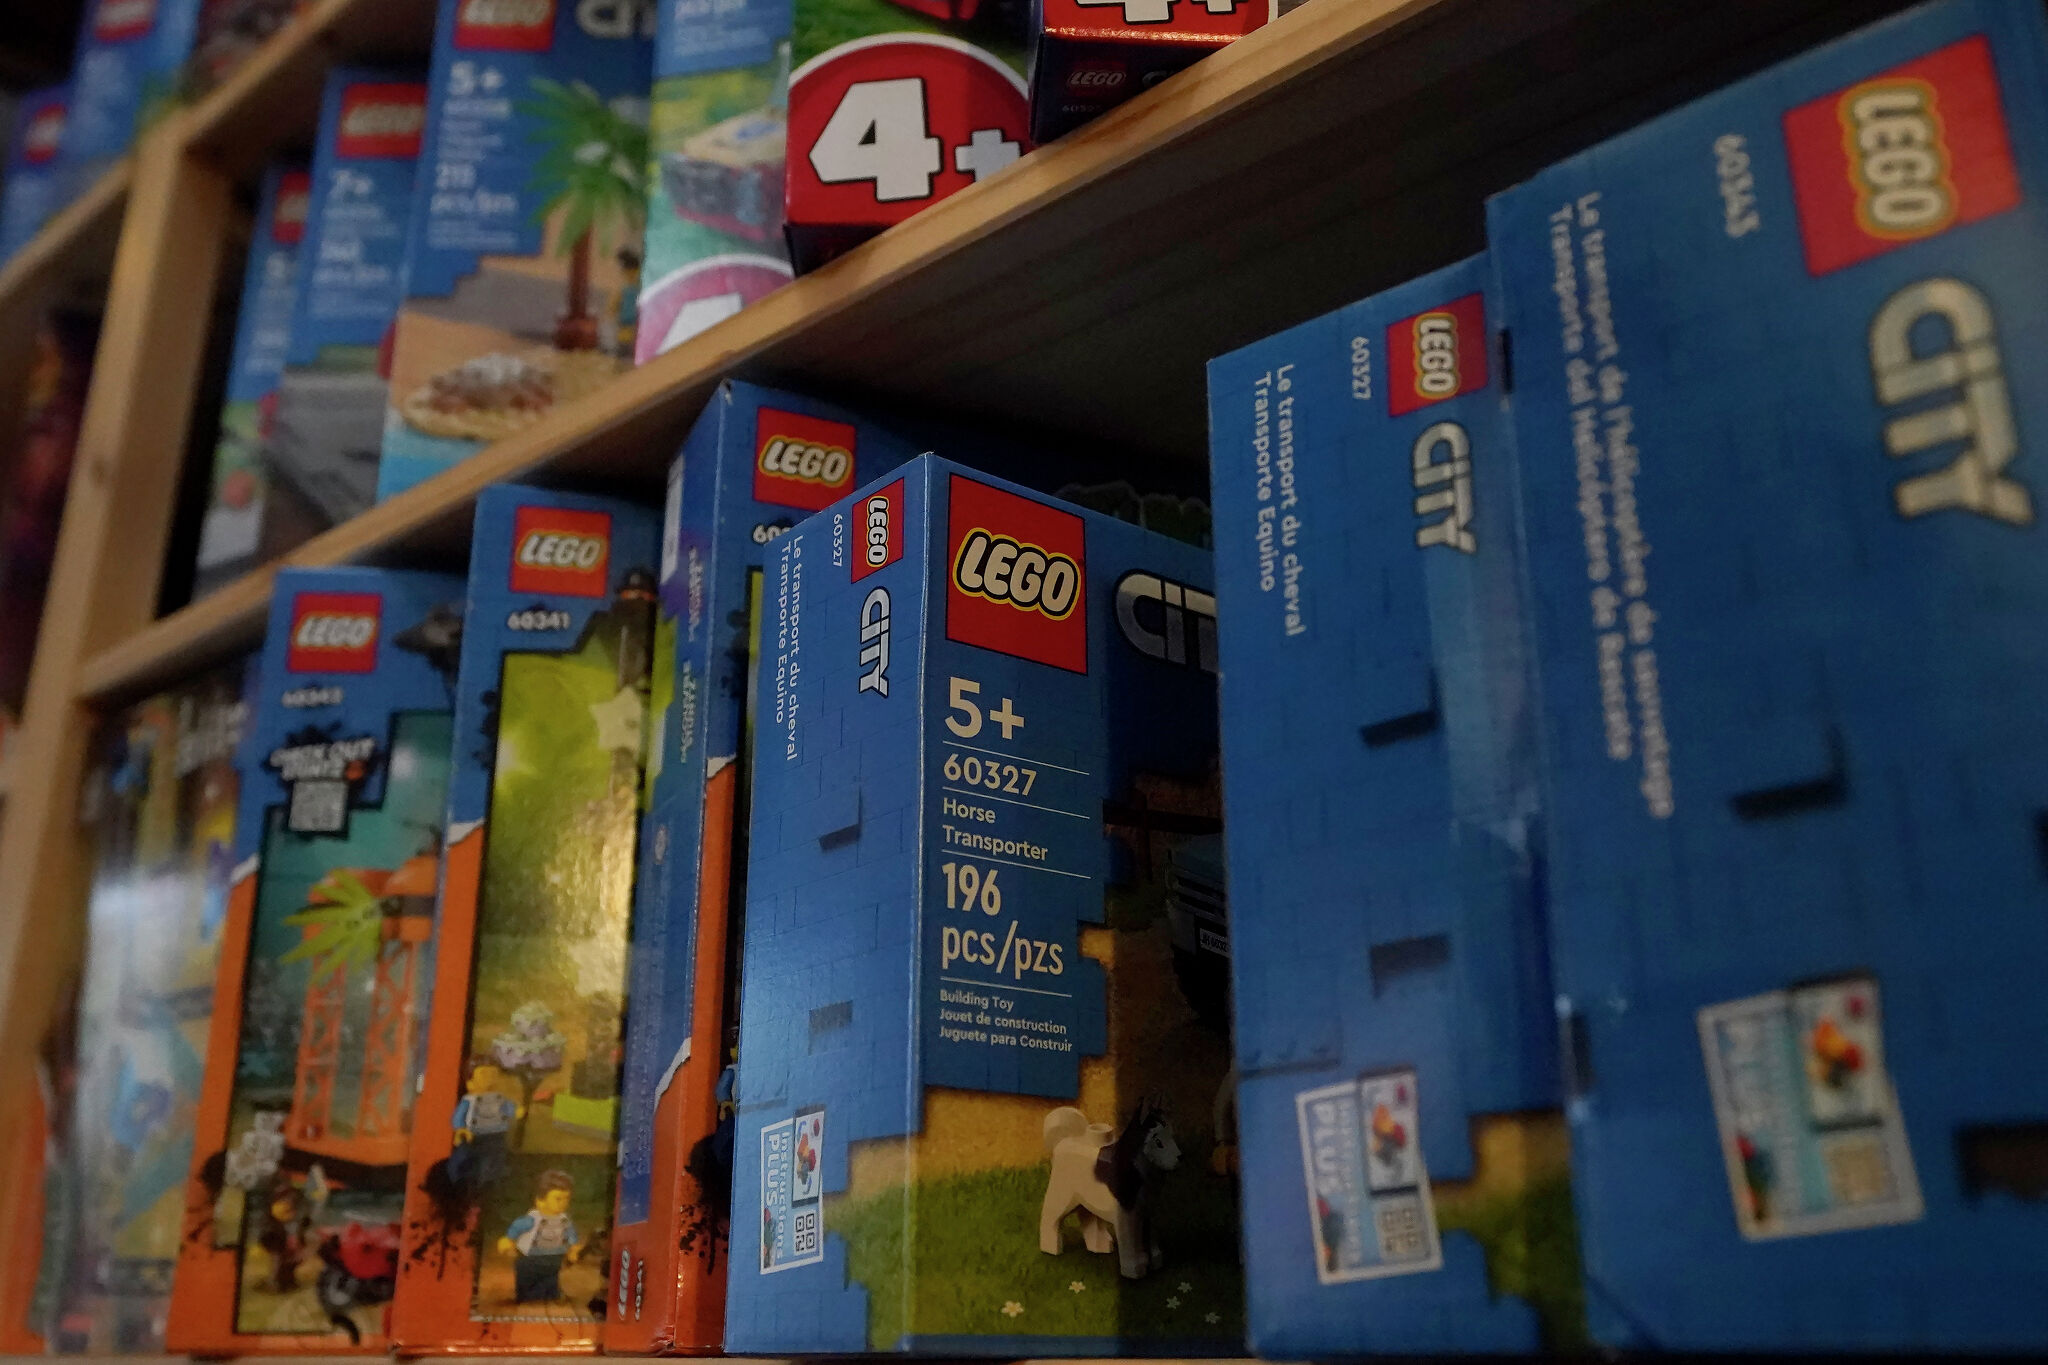 Lego moving Americas 740 jobs out of Connecticut